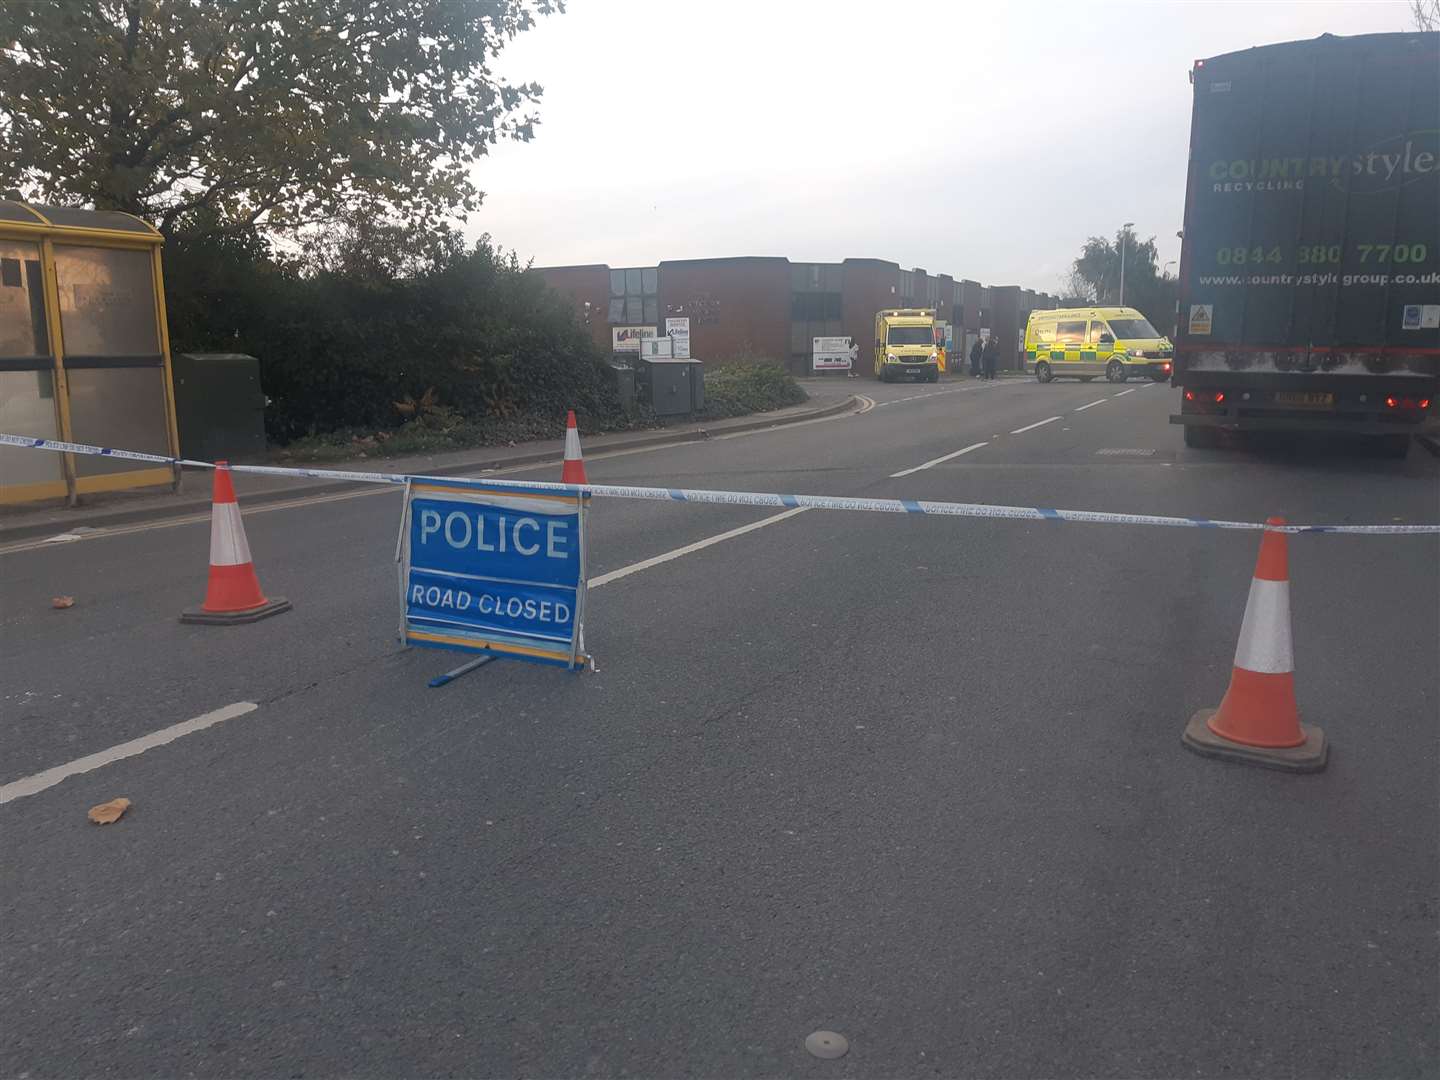 Police blocked the road while medics treated the crash victims.